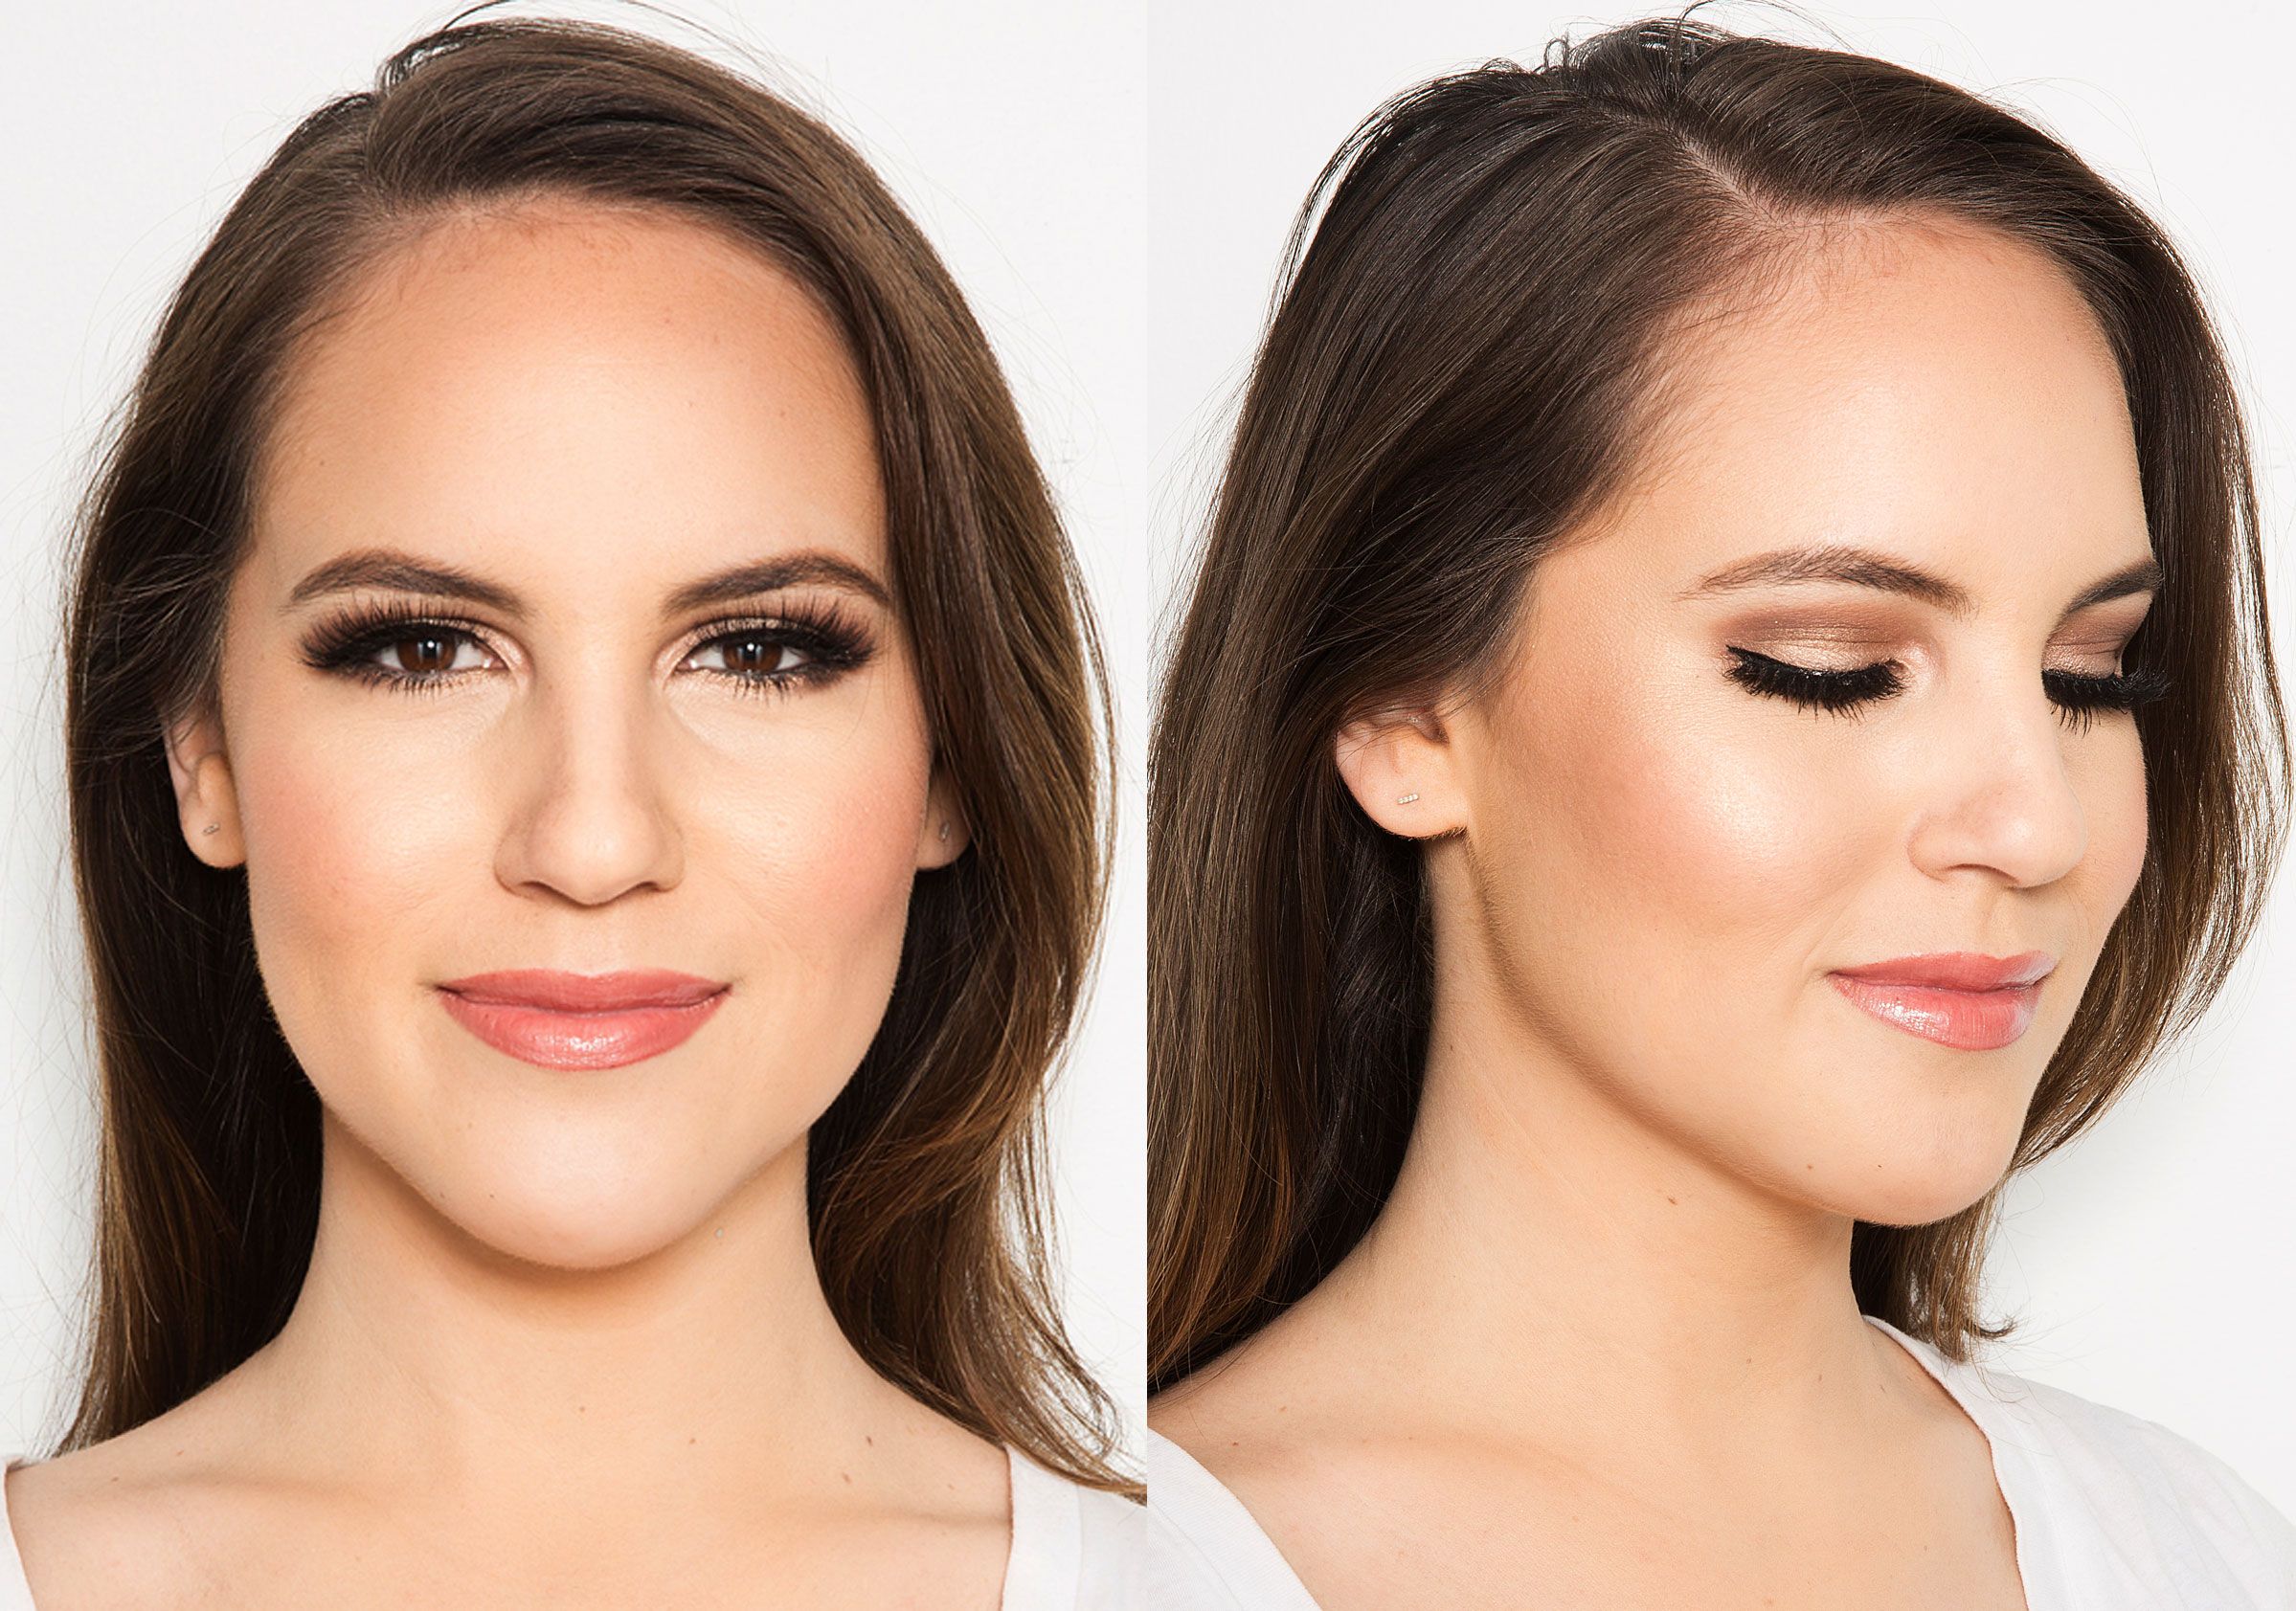 What I Learned Trying 5 Popular Wedding Makeup Options